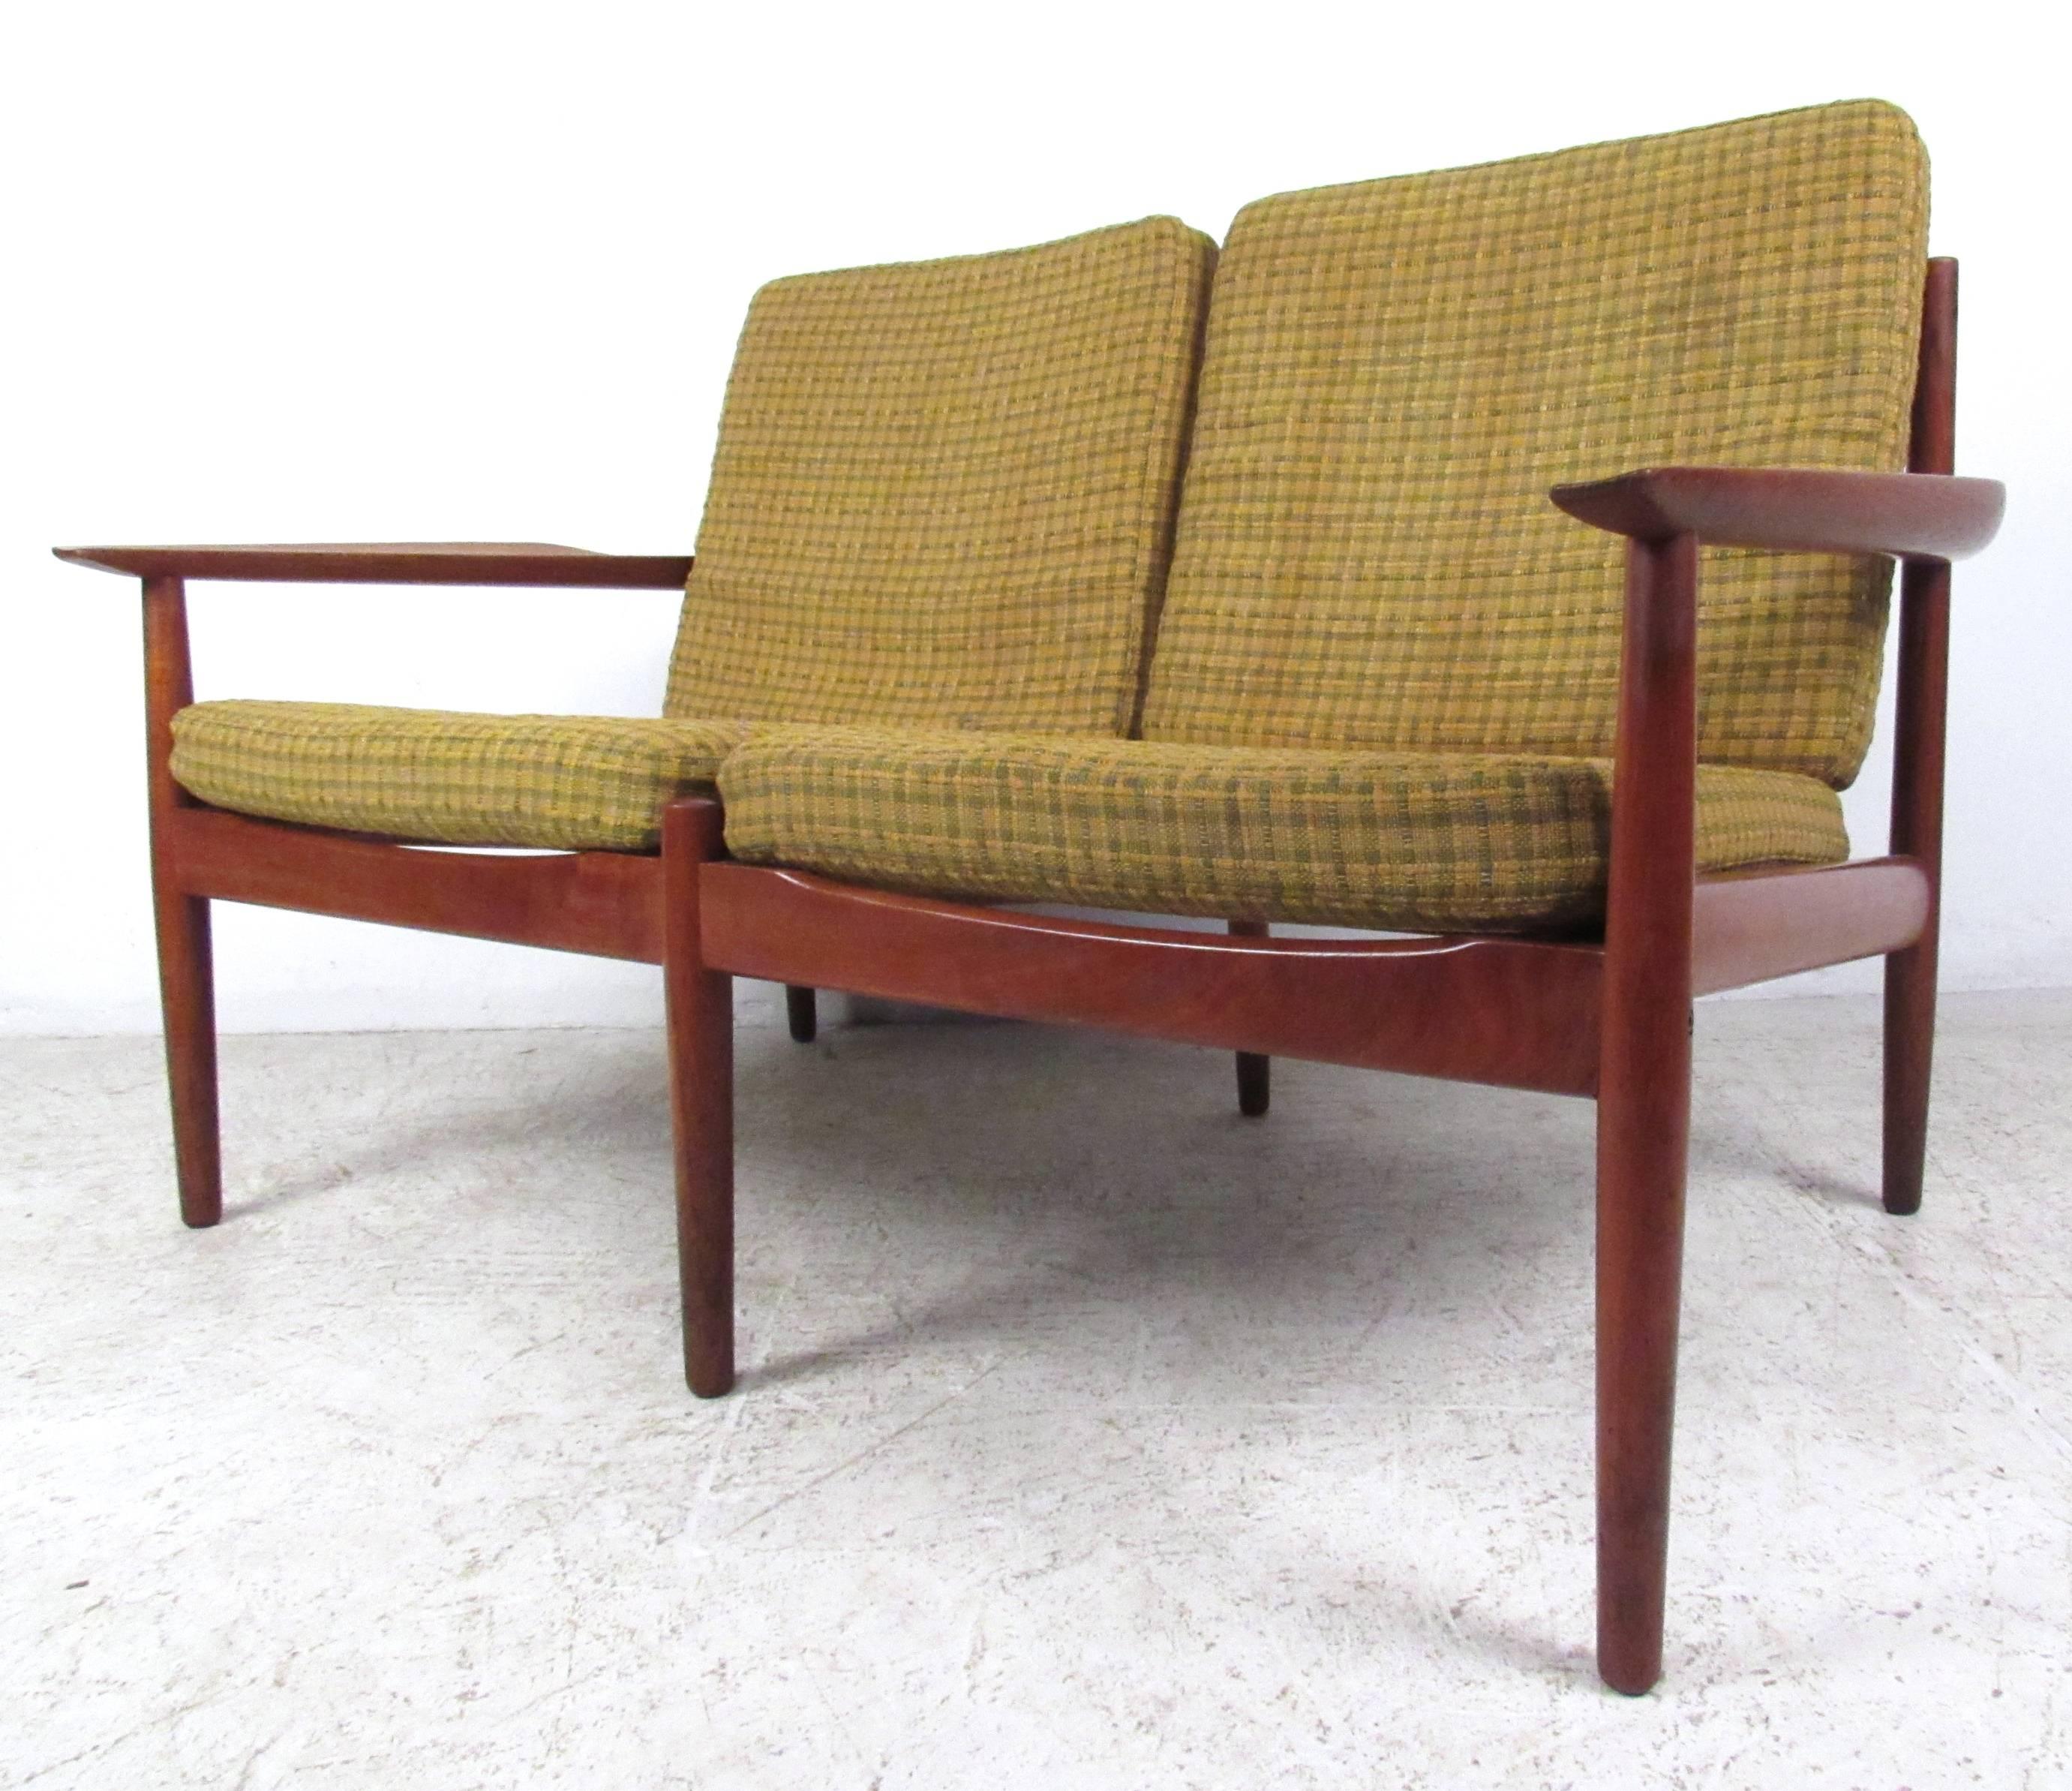 This Danish vintage two-seat offers a stylish teak finish with a uniquely sized two-seat settee. By Arne Vodder, this seating option is perfect for home or office setting. Please confirm item location (NY or NJ).